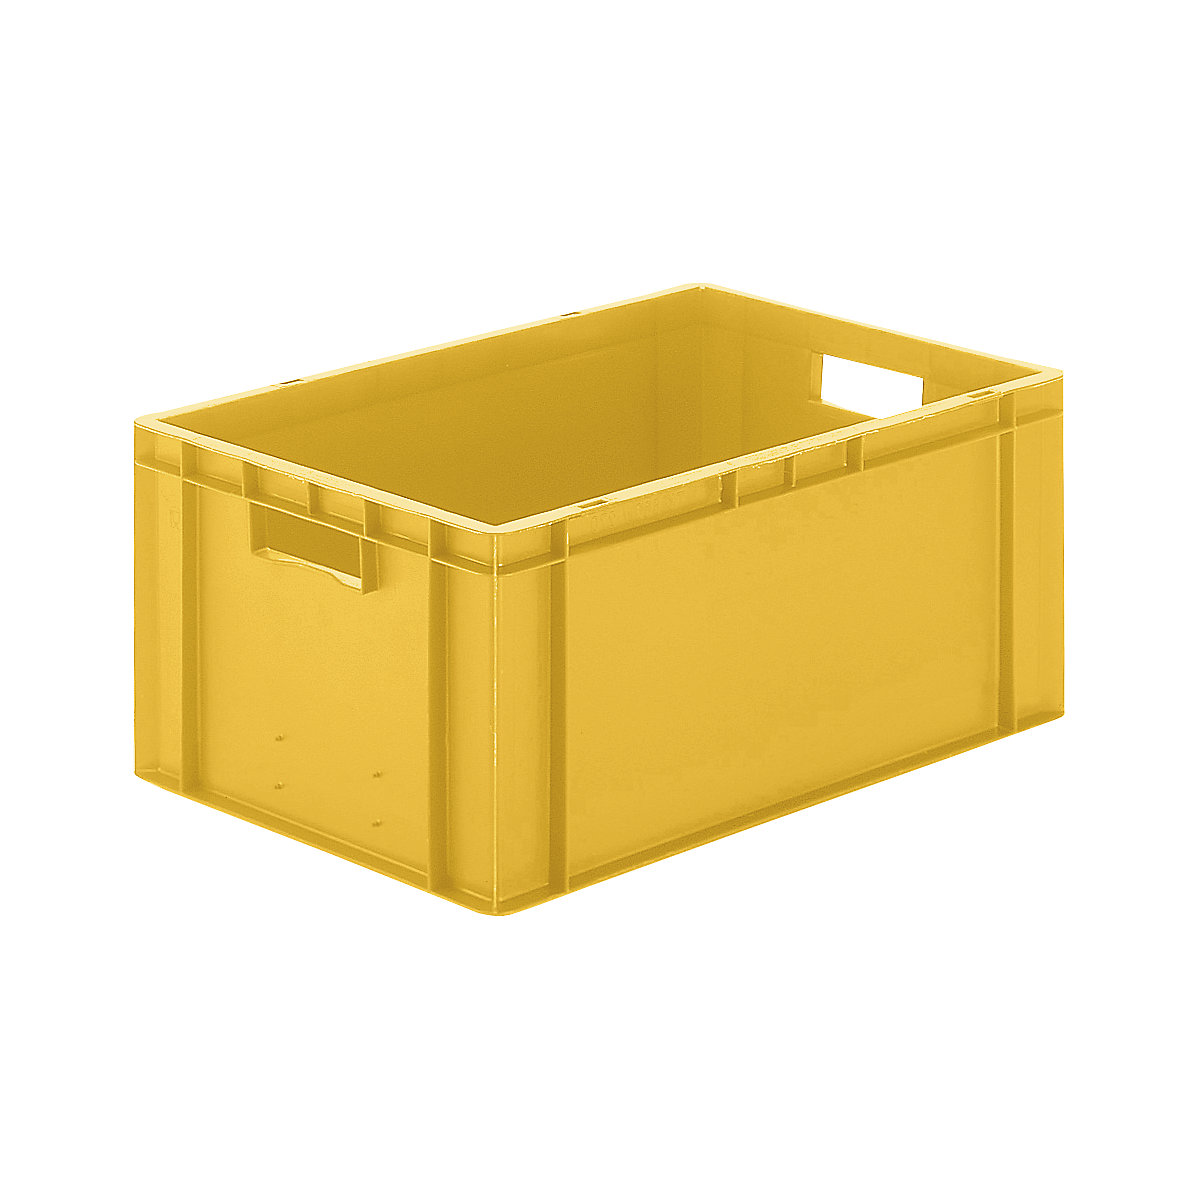 Euro stacking container, closed walls and base, LxWxH 600 x 400 x 270 mm, yellow, pack of 5-6